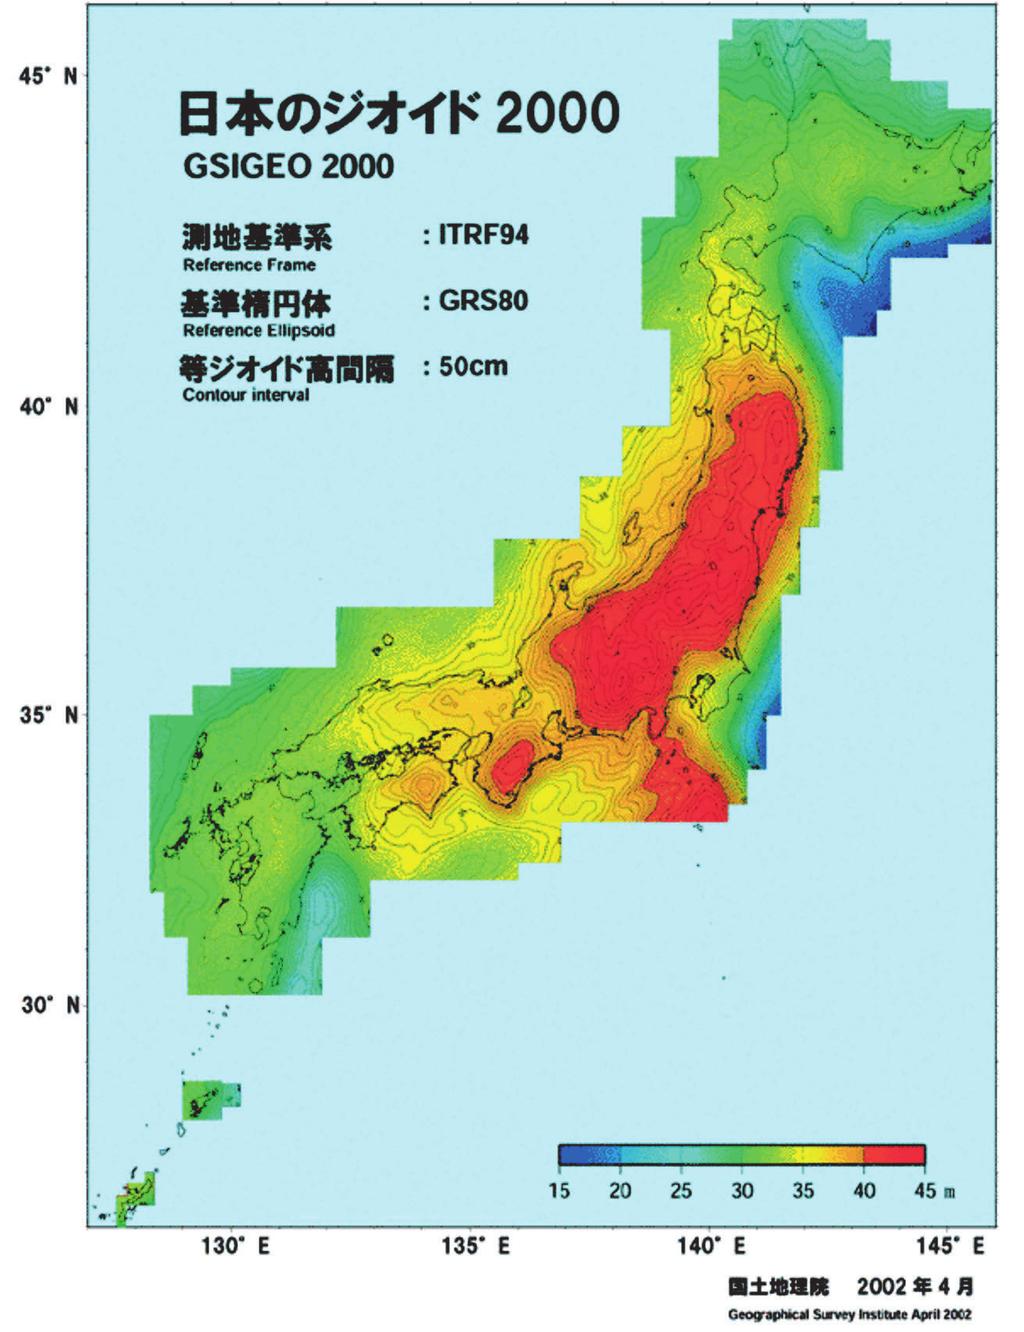 60 Bulletin of the Geographical Survey Institute, Vol.49 March, 2003 (Kuroishi, Ando: 2001) and their major surrounding islands.